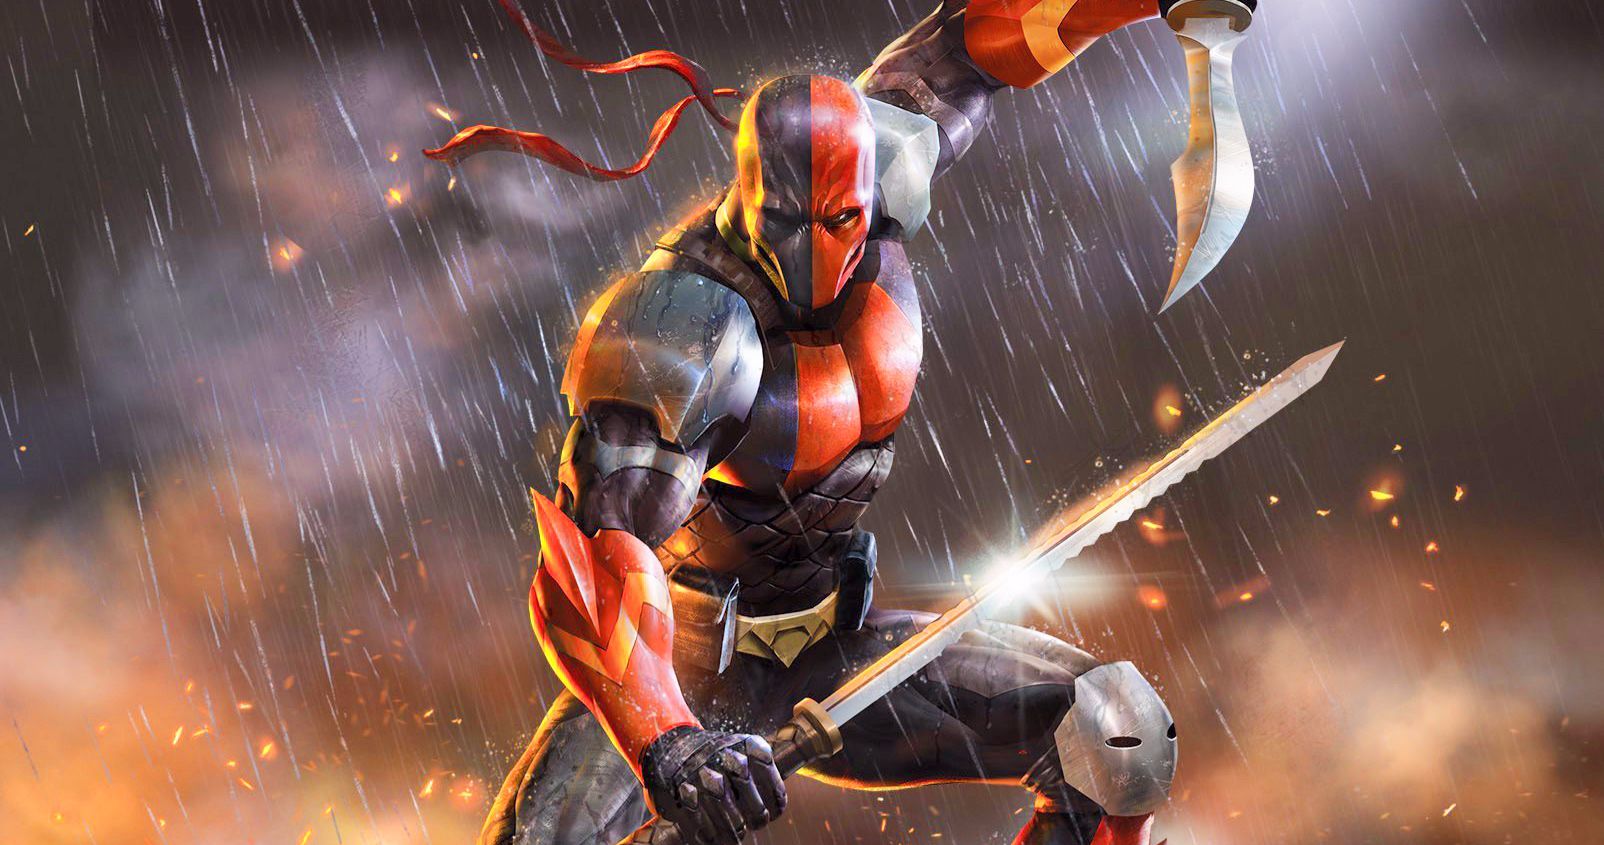 Deathstroke - why do DC keep putting him in so many TV and film projects?